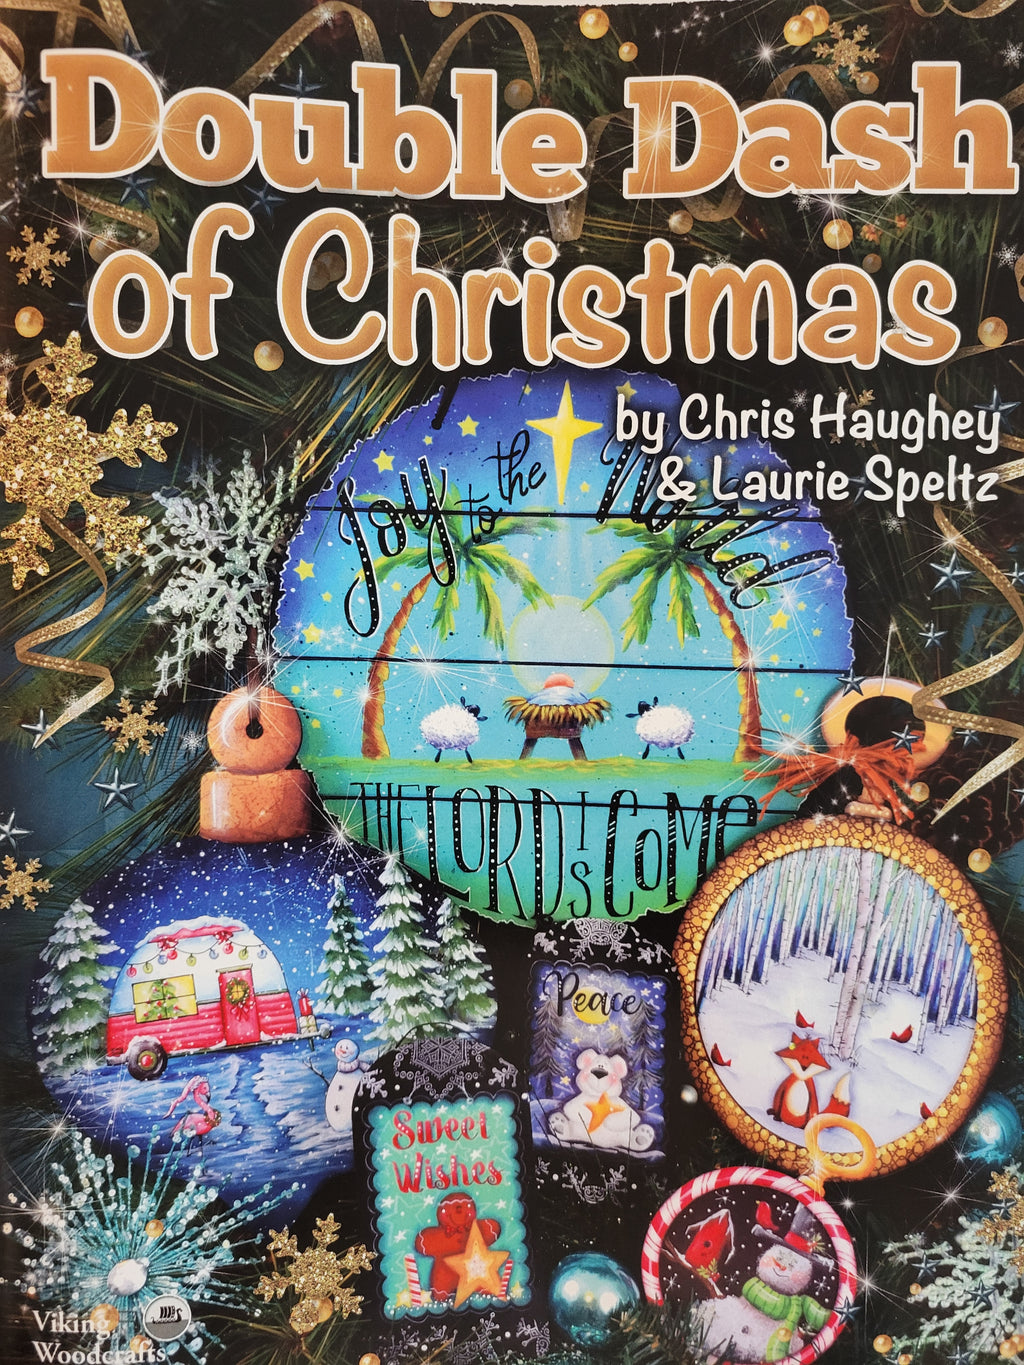 Double Dash of Christmas by Chris Haughey & Laurie Speltz